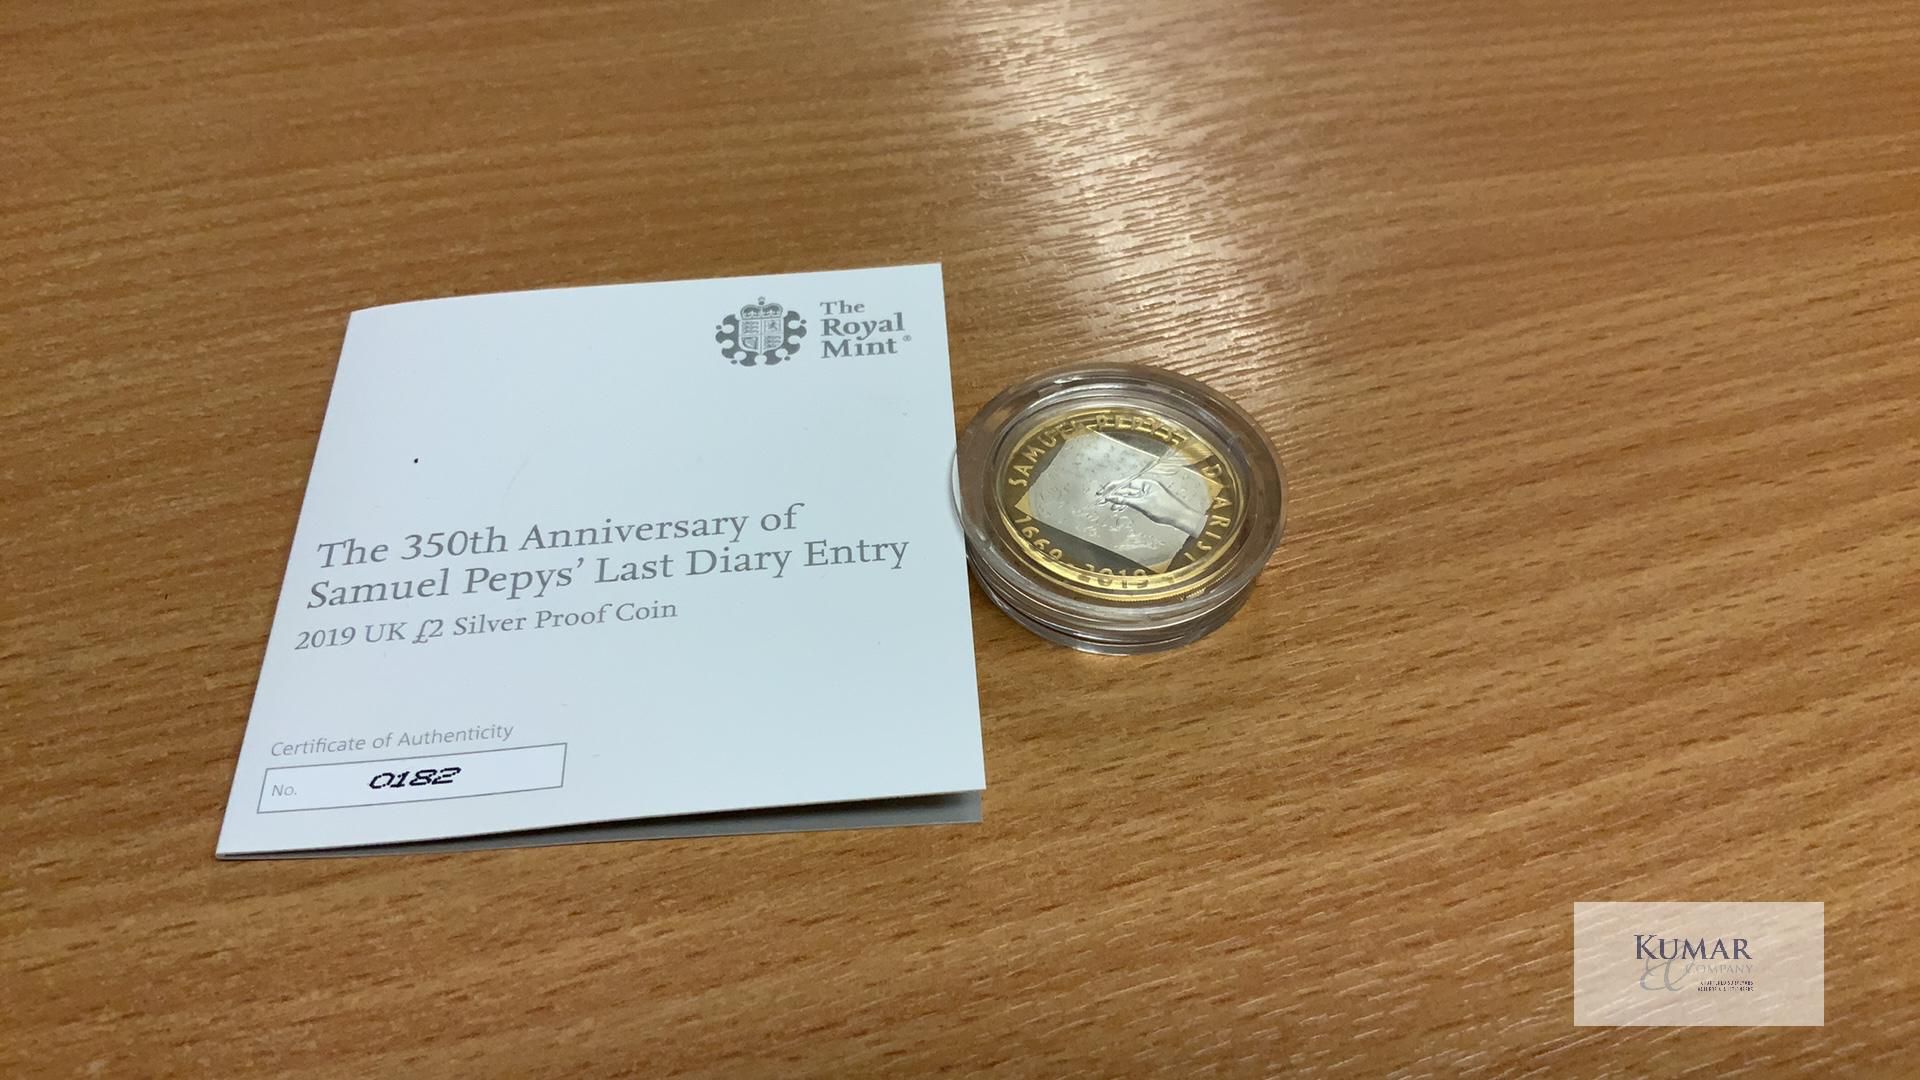 The Royal Mint Coin - The 350th Anniversary of Samuel Pepys Last Diary Entry 2019 UK £2 Silver Proof - Image 4 of 4